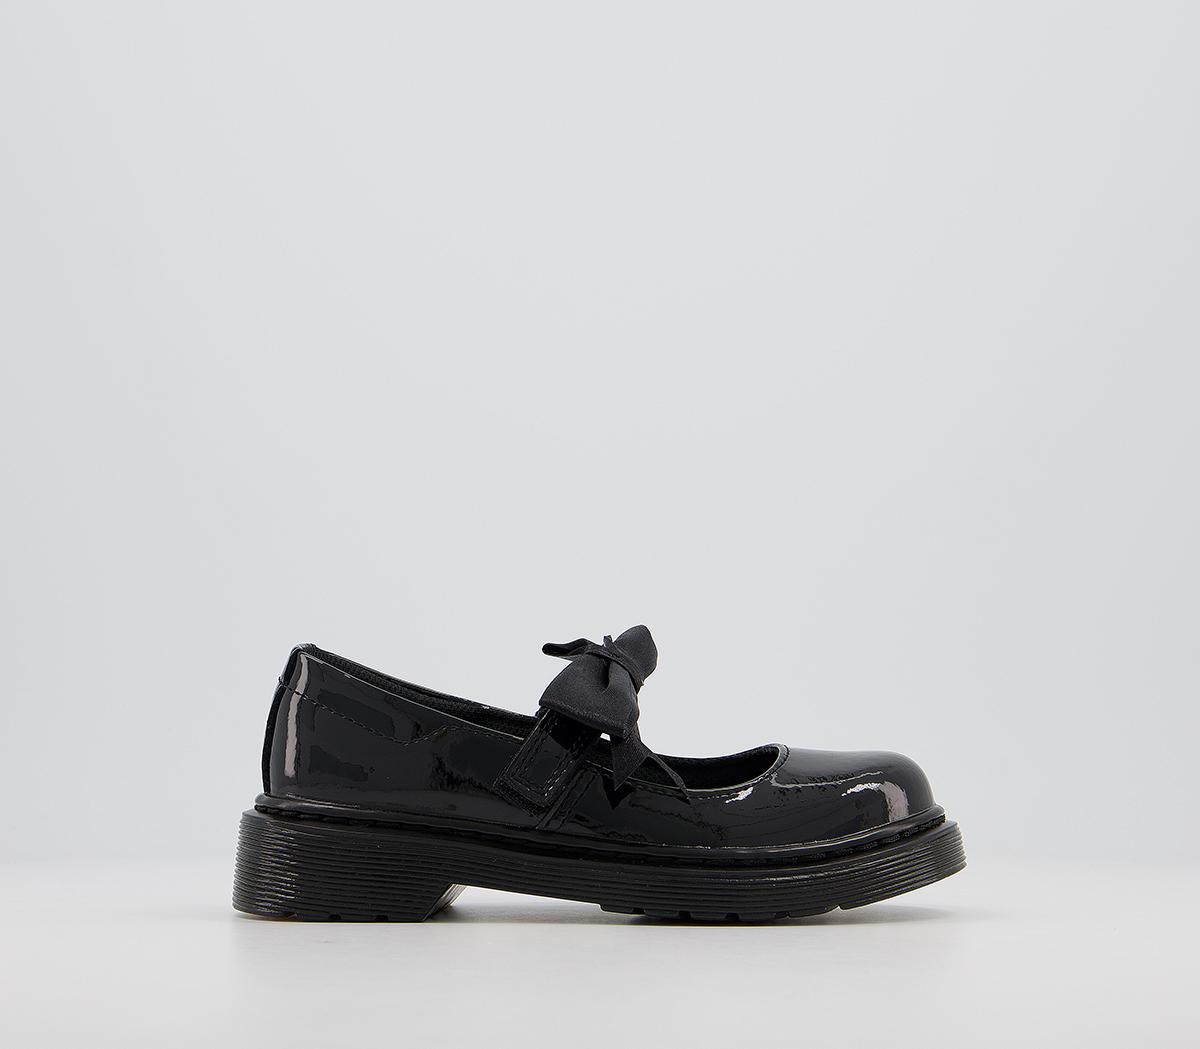 Kids Maccy Ii Bow Mary Jane Jnr Black Patent Leather